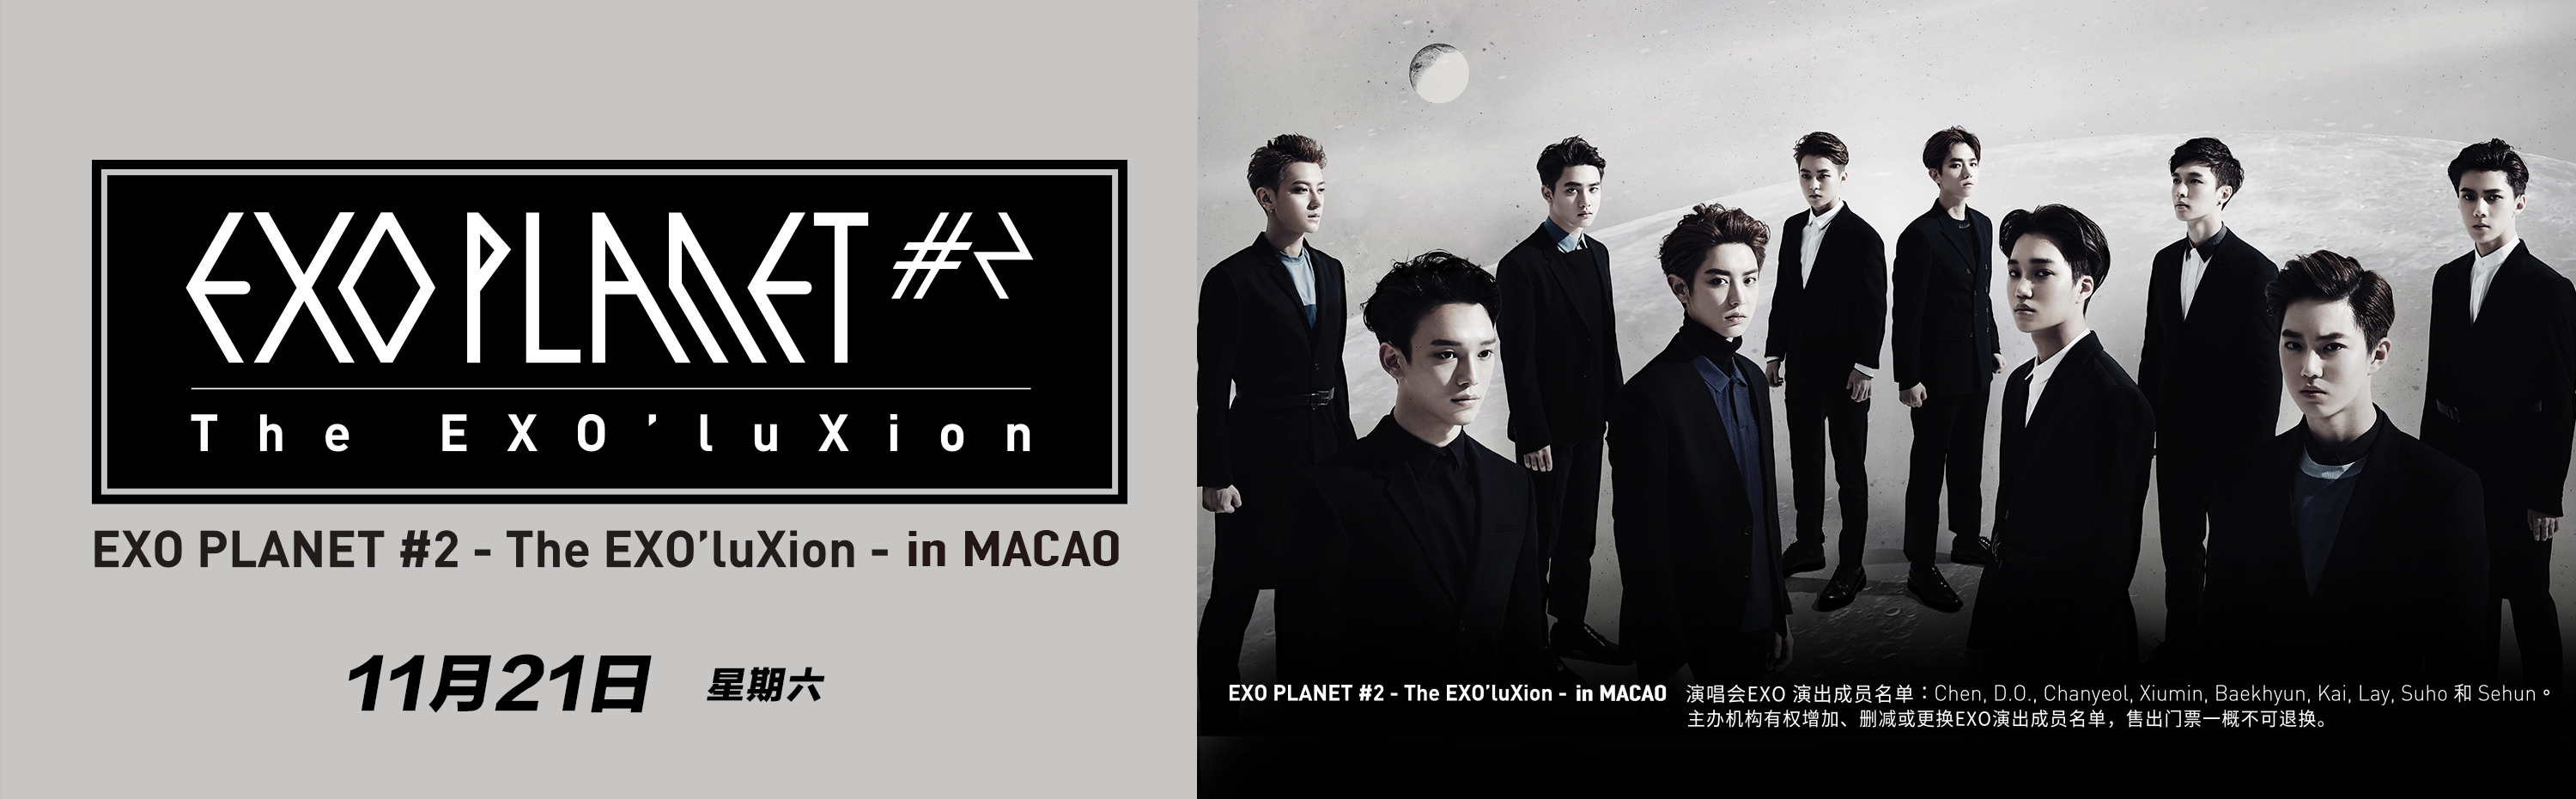 EXO PLANET #2 - The EXO'luXion - in MACAO 